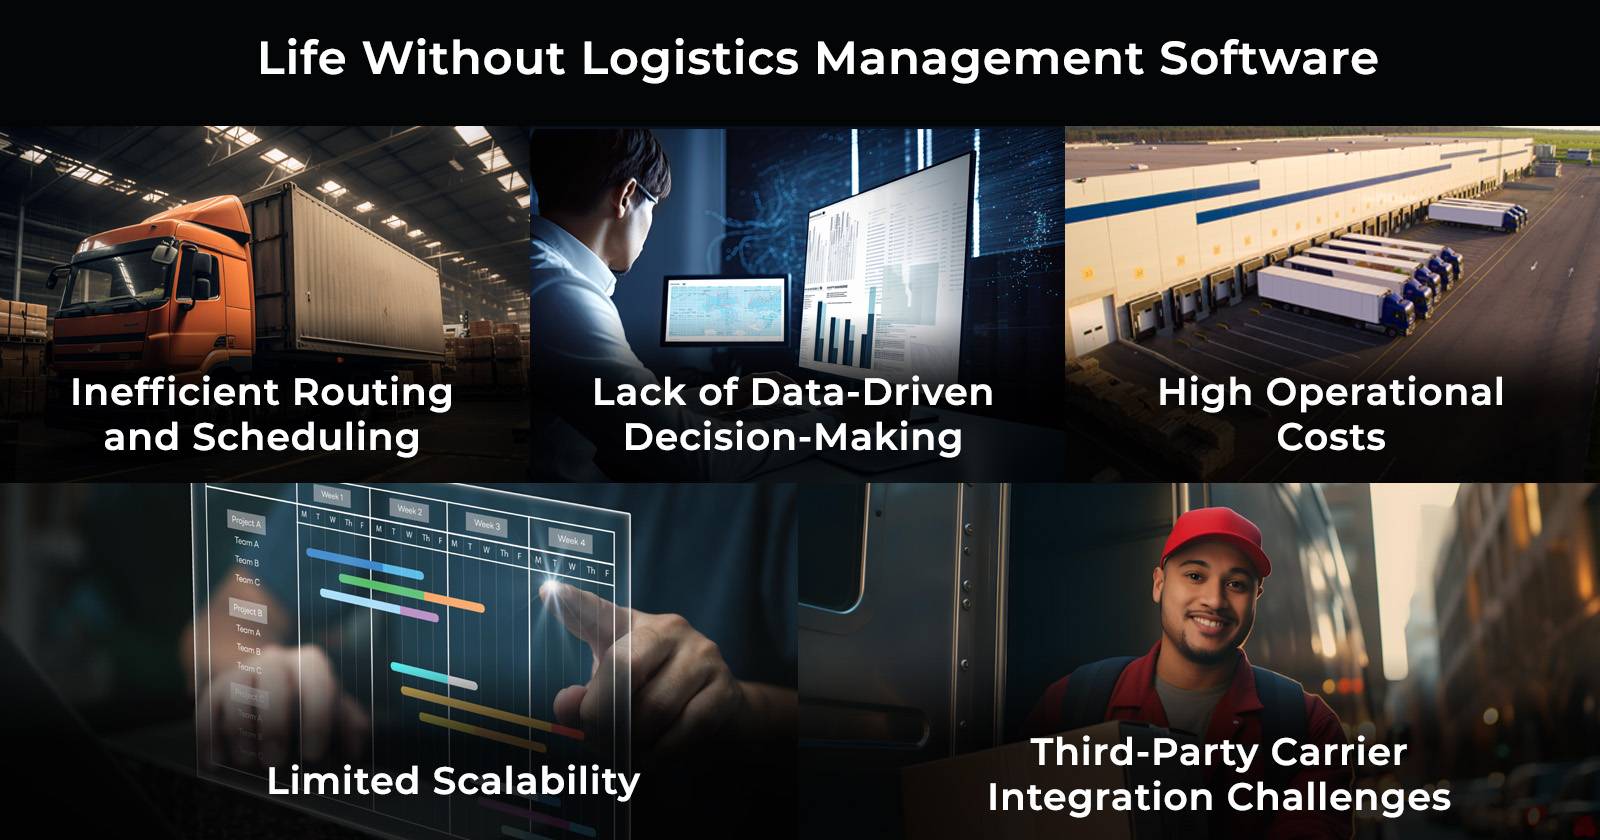 5 challenges observed in operations without logistics management solution